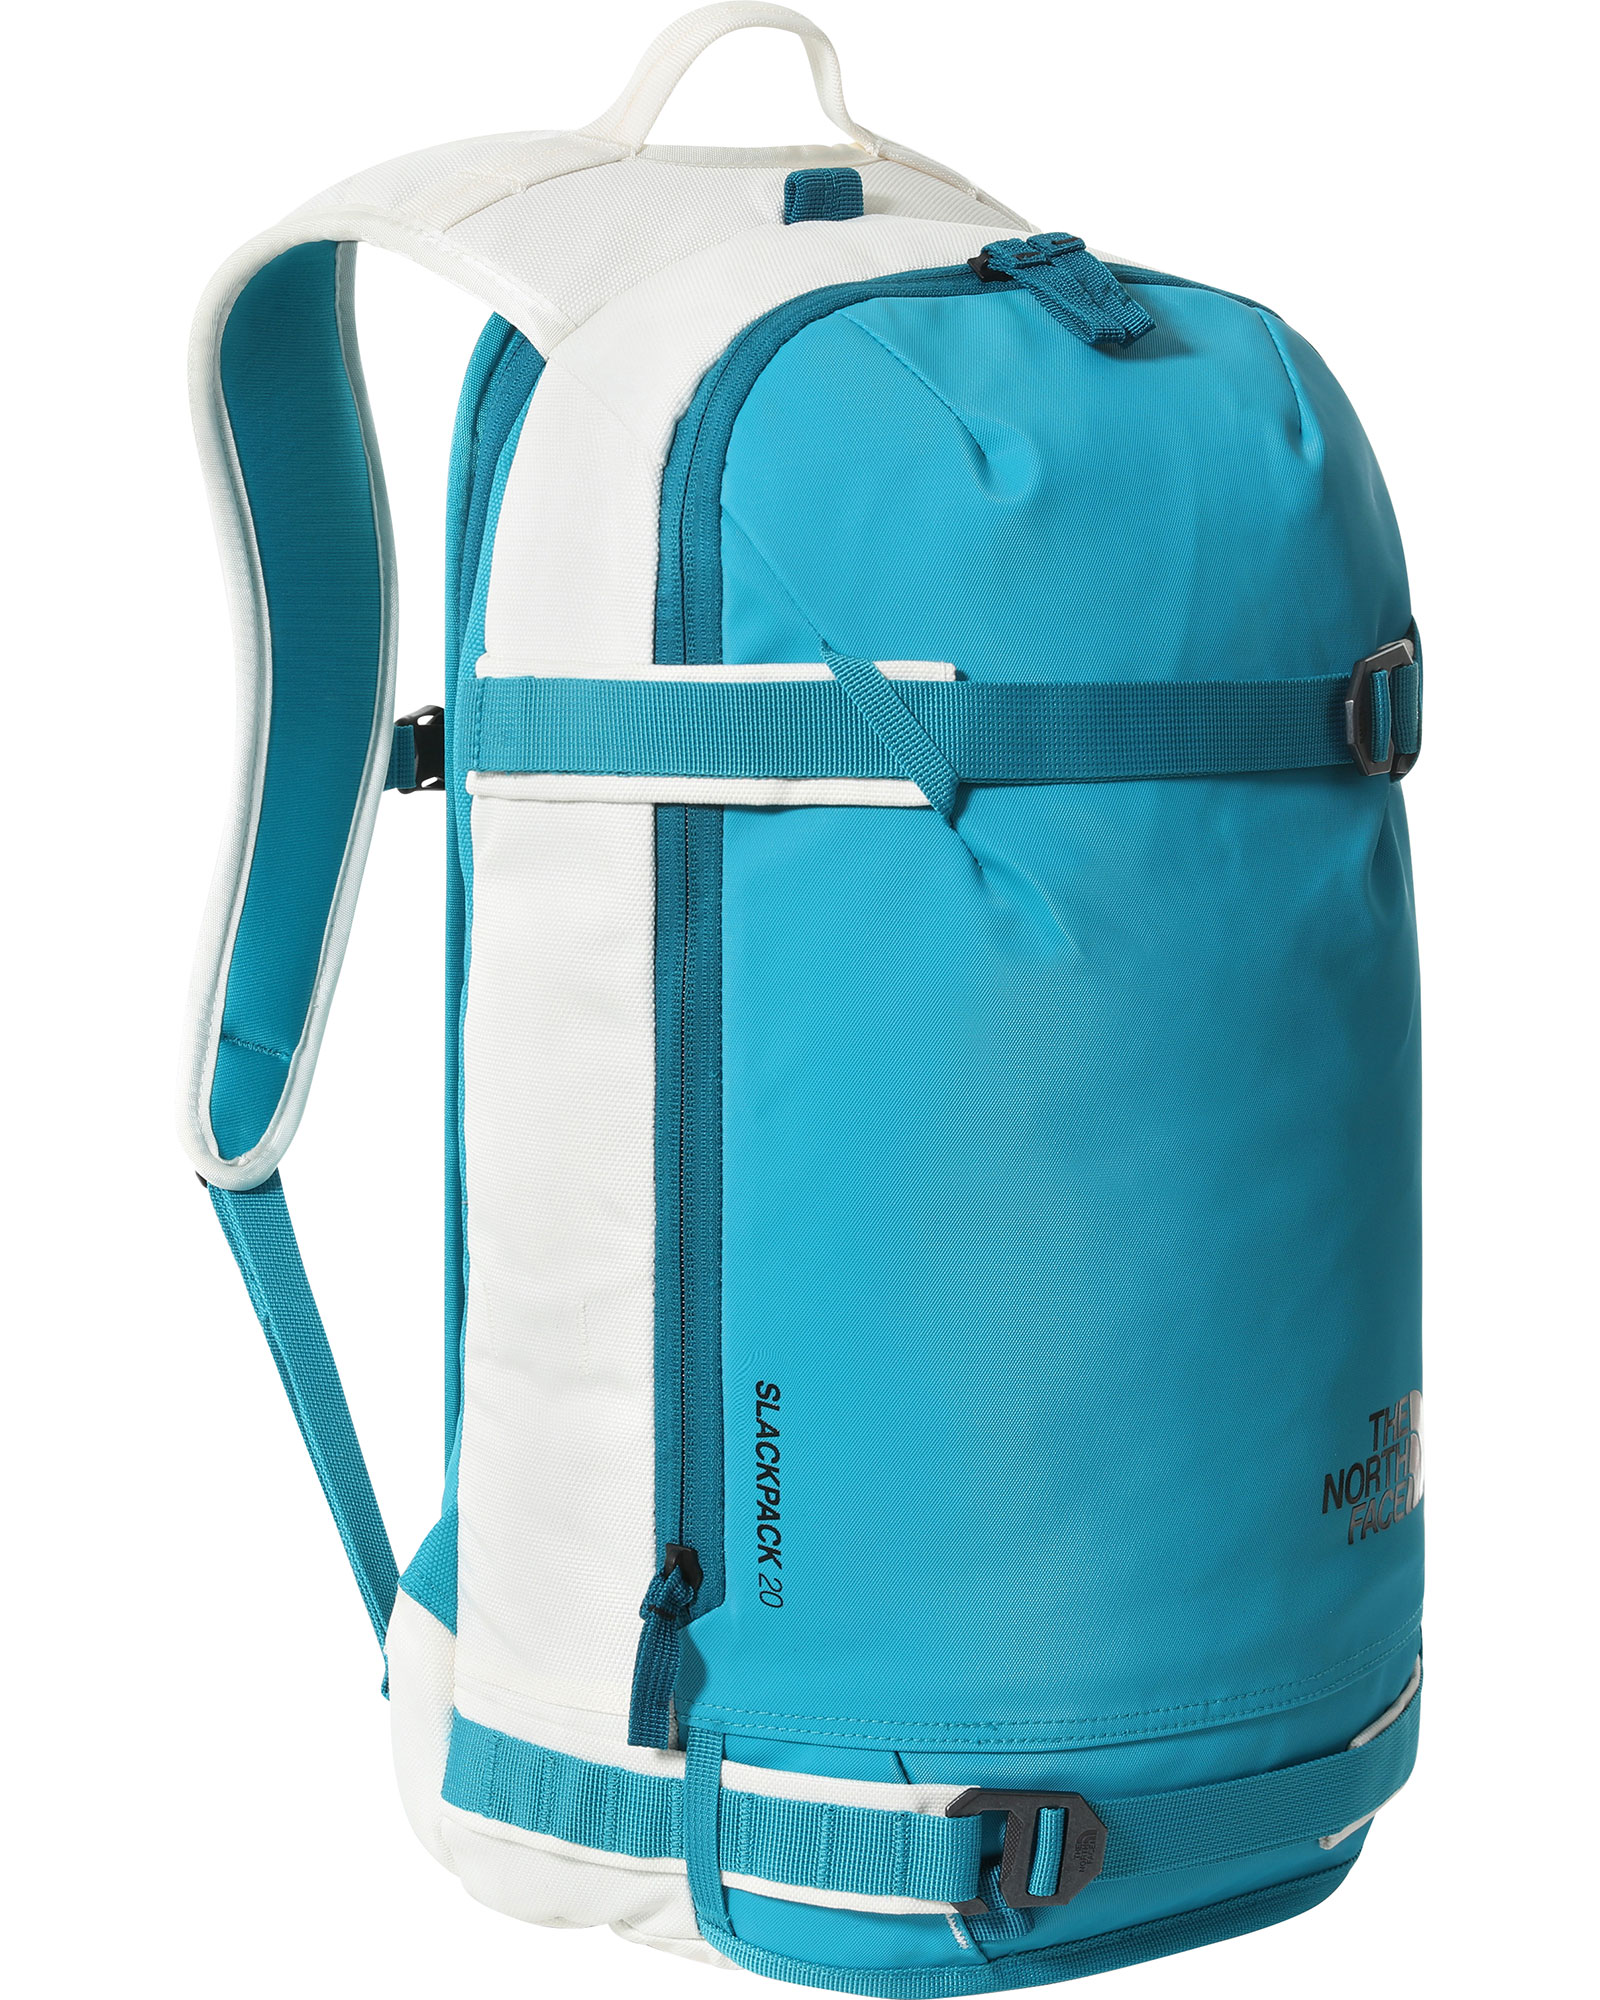 The North Face Women's Slackpack 2.0 Expedition Backpack